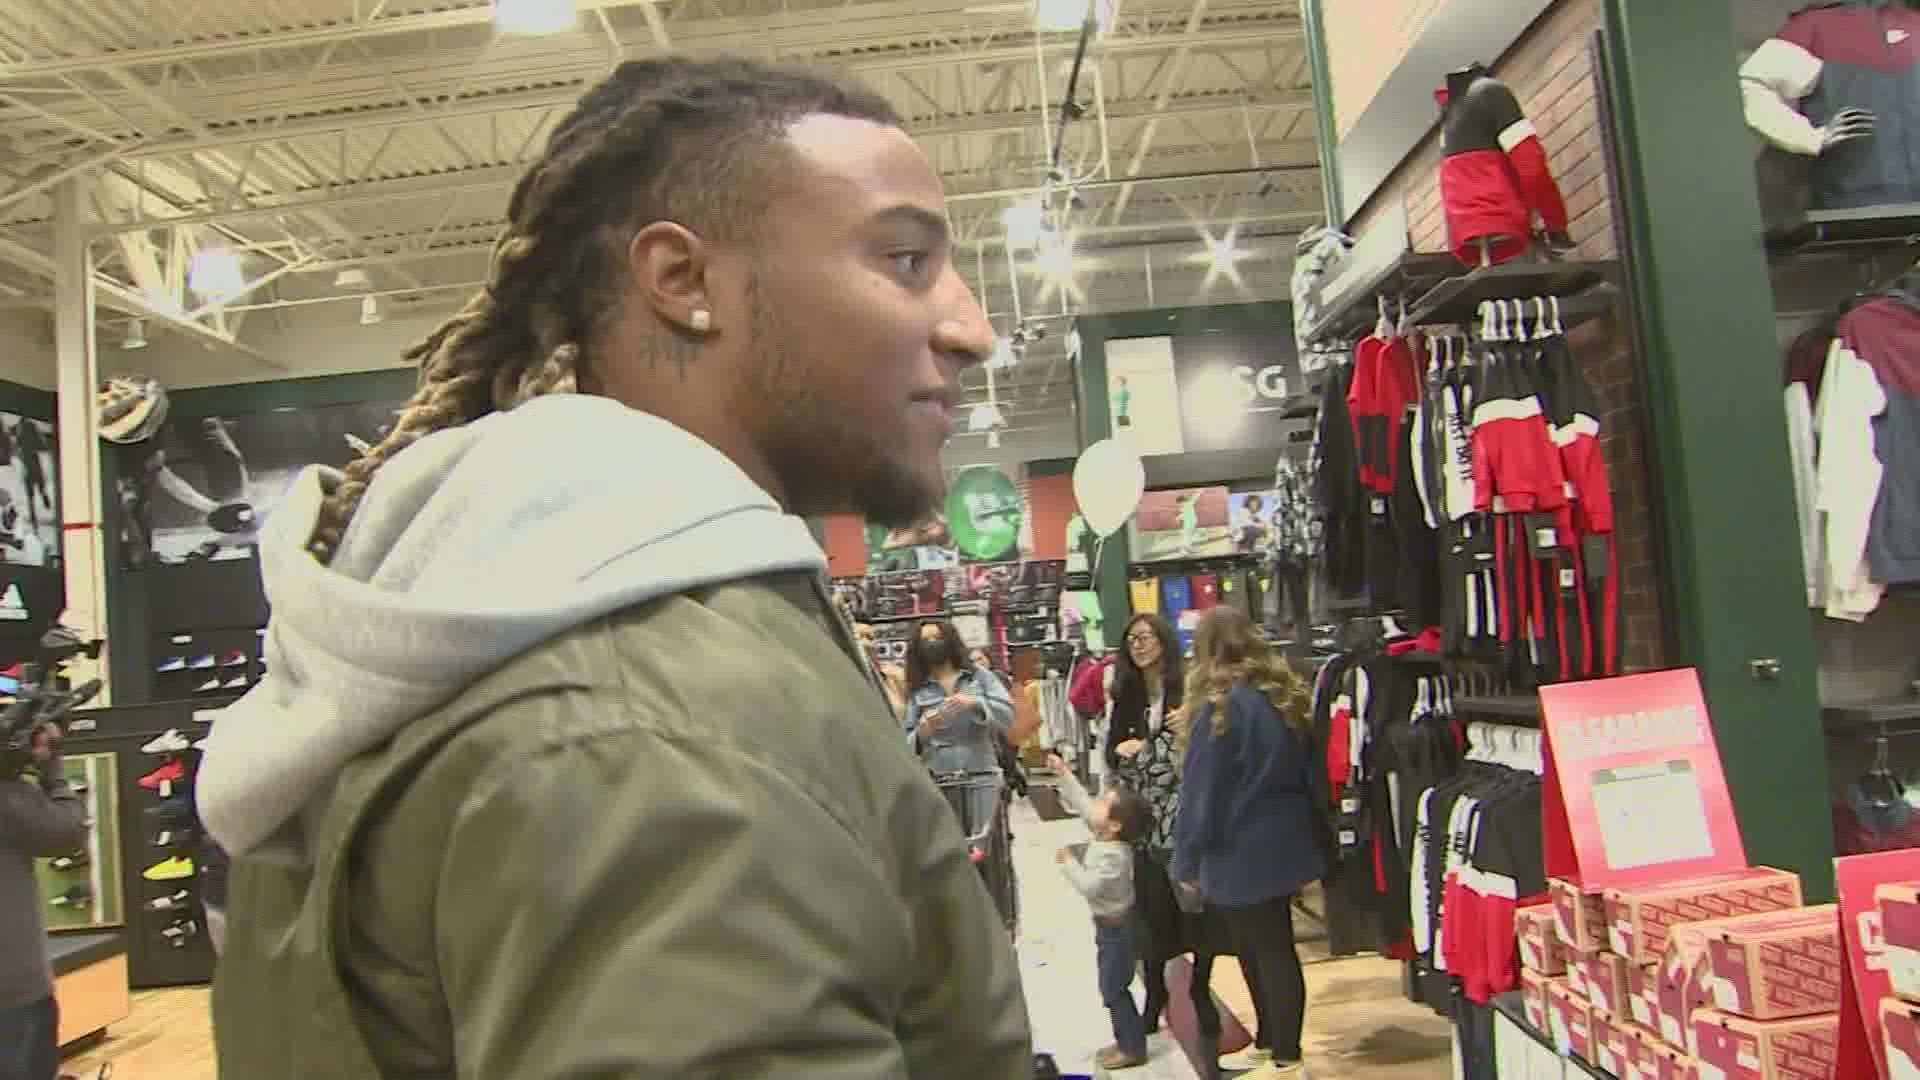 The Houston Texans safety took little boy Blaine on a shopping spree as his dad recovers in the hospital from the Christmas Eve shooting.